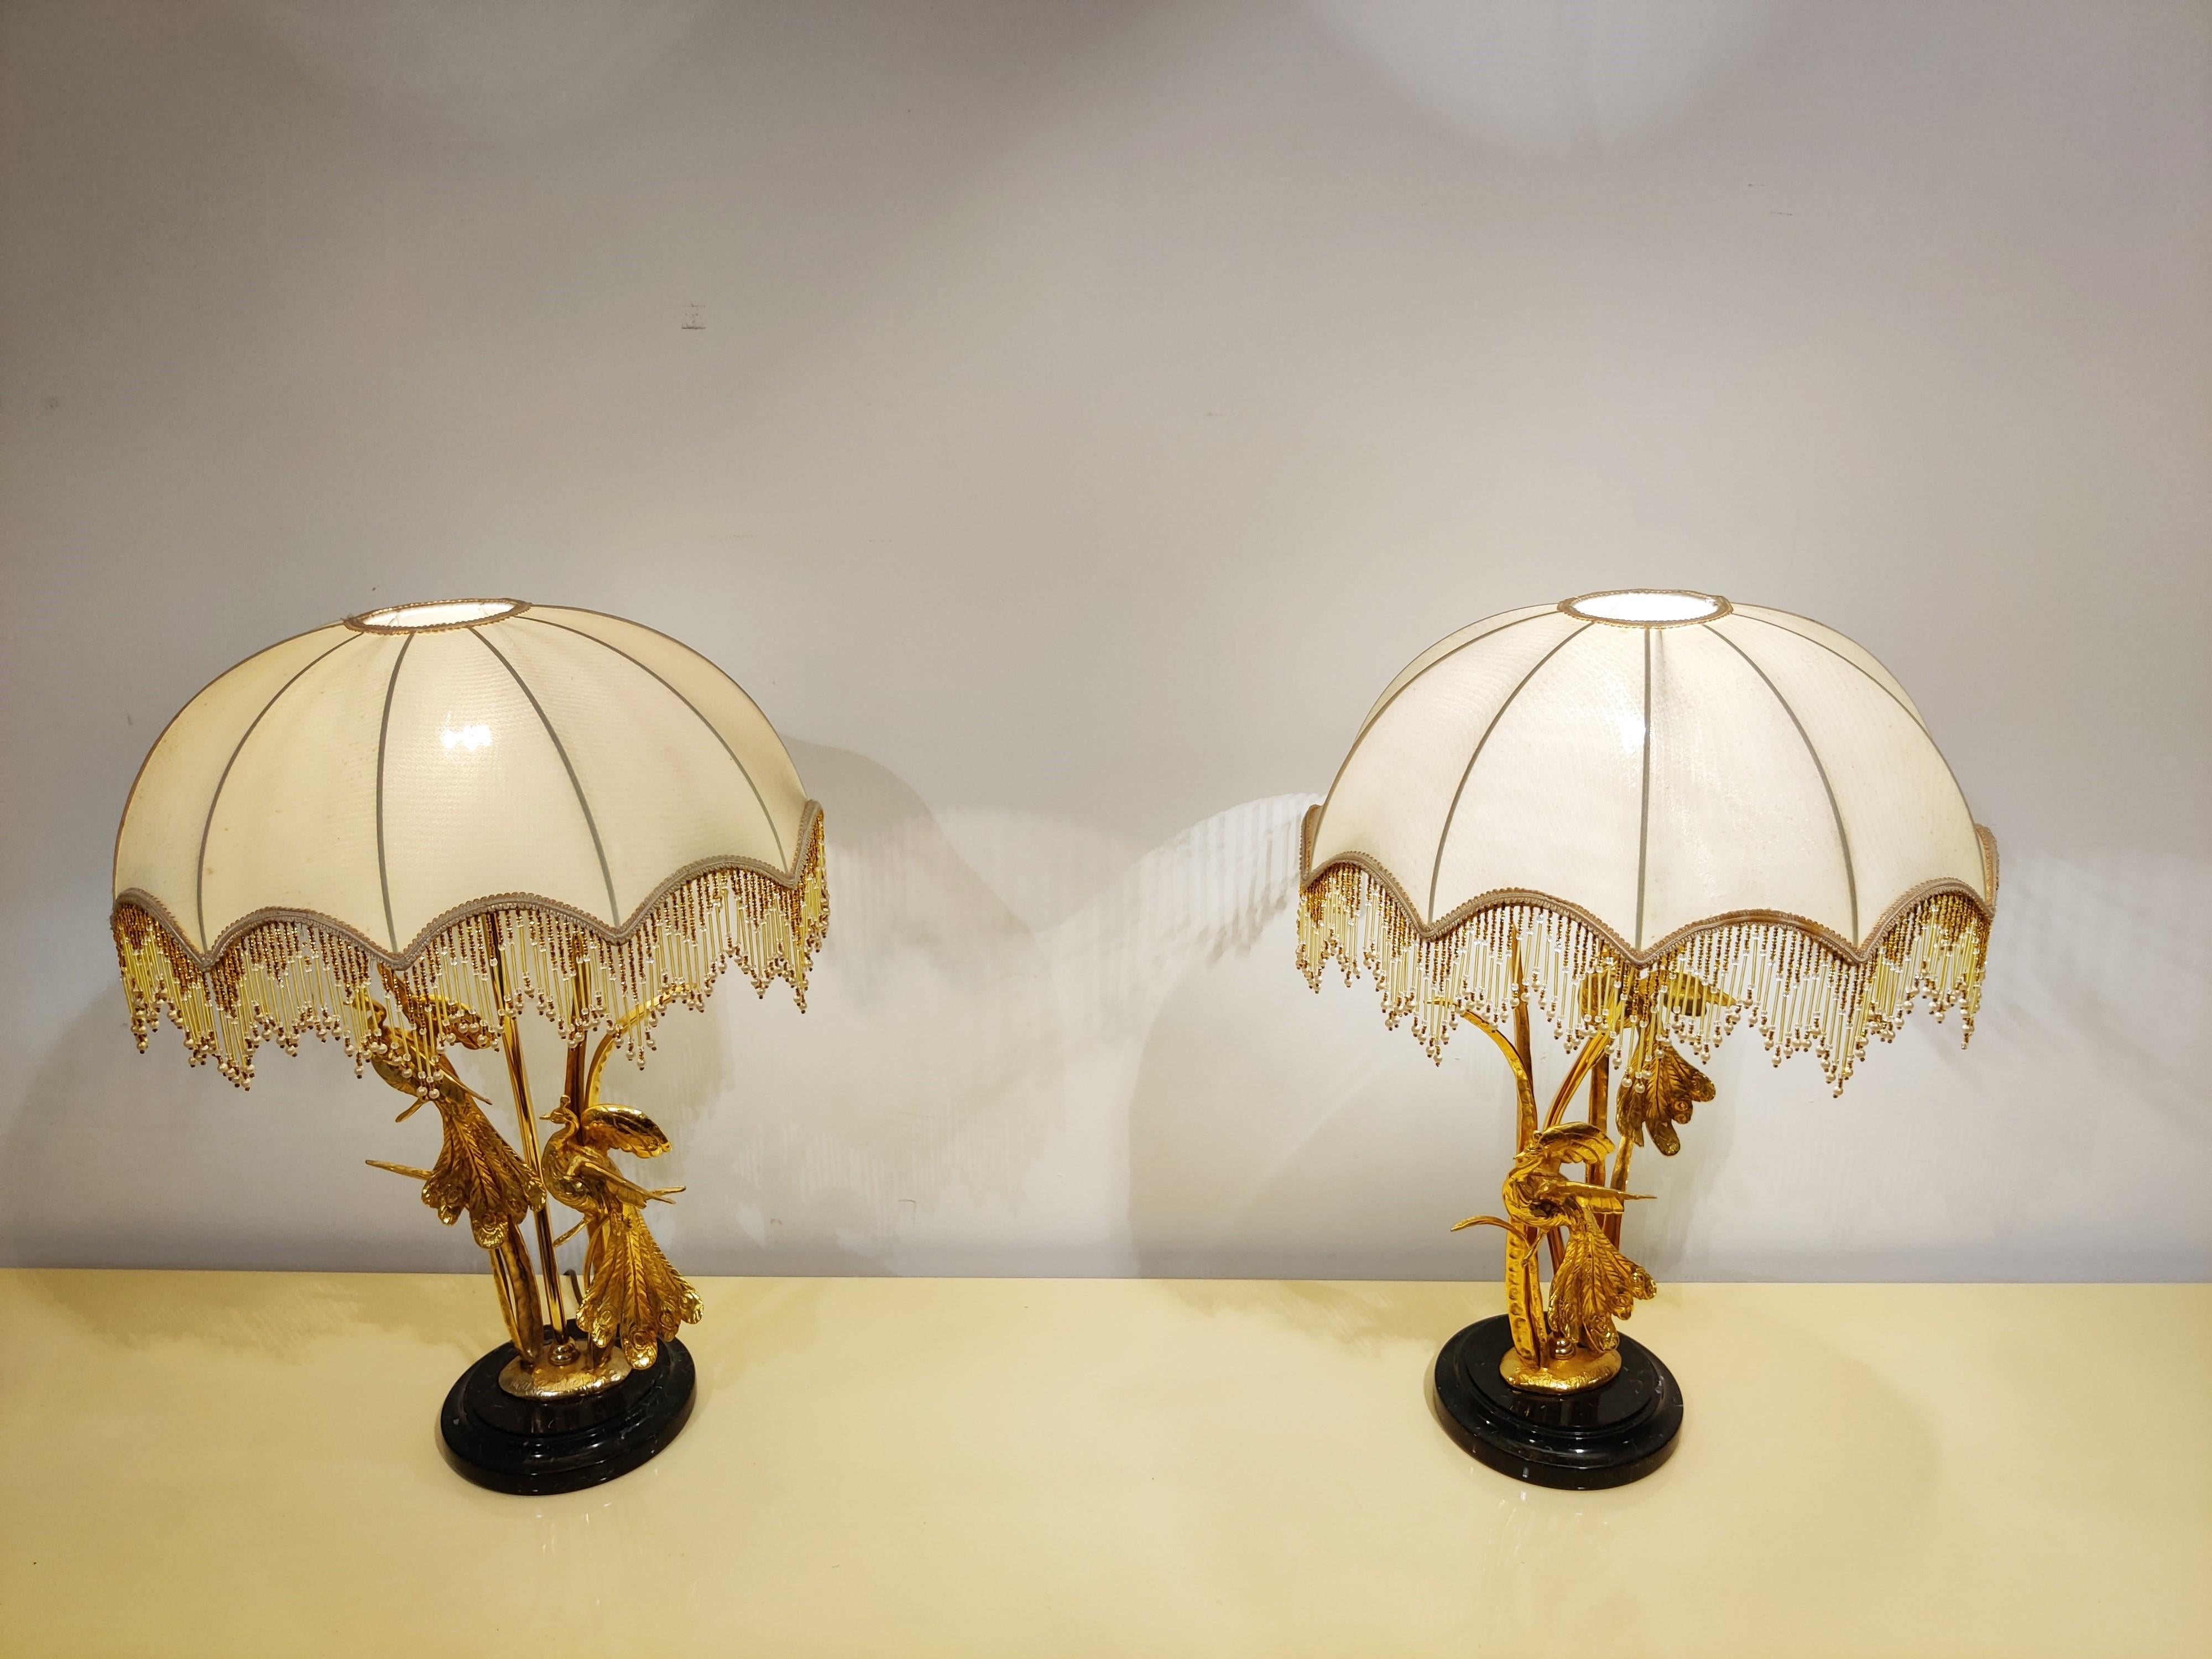 Hollywood Regency Pair of Vintage Table Lamps by L. Galeotti, 1970s